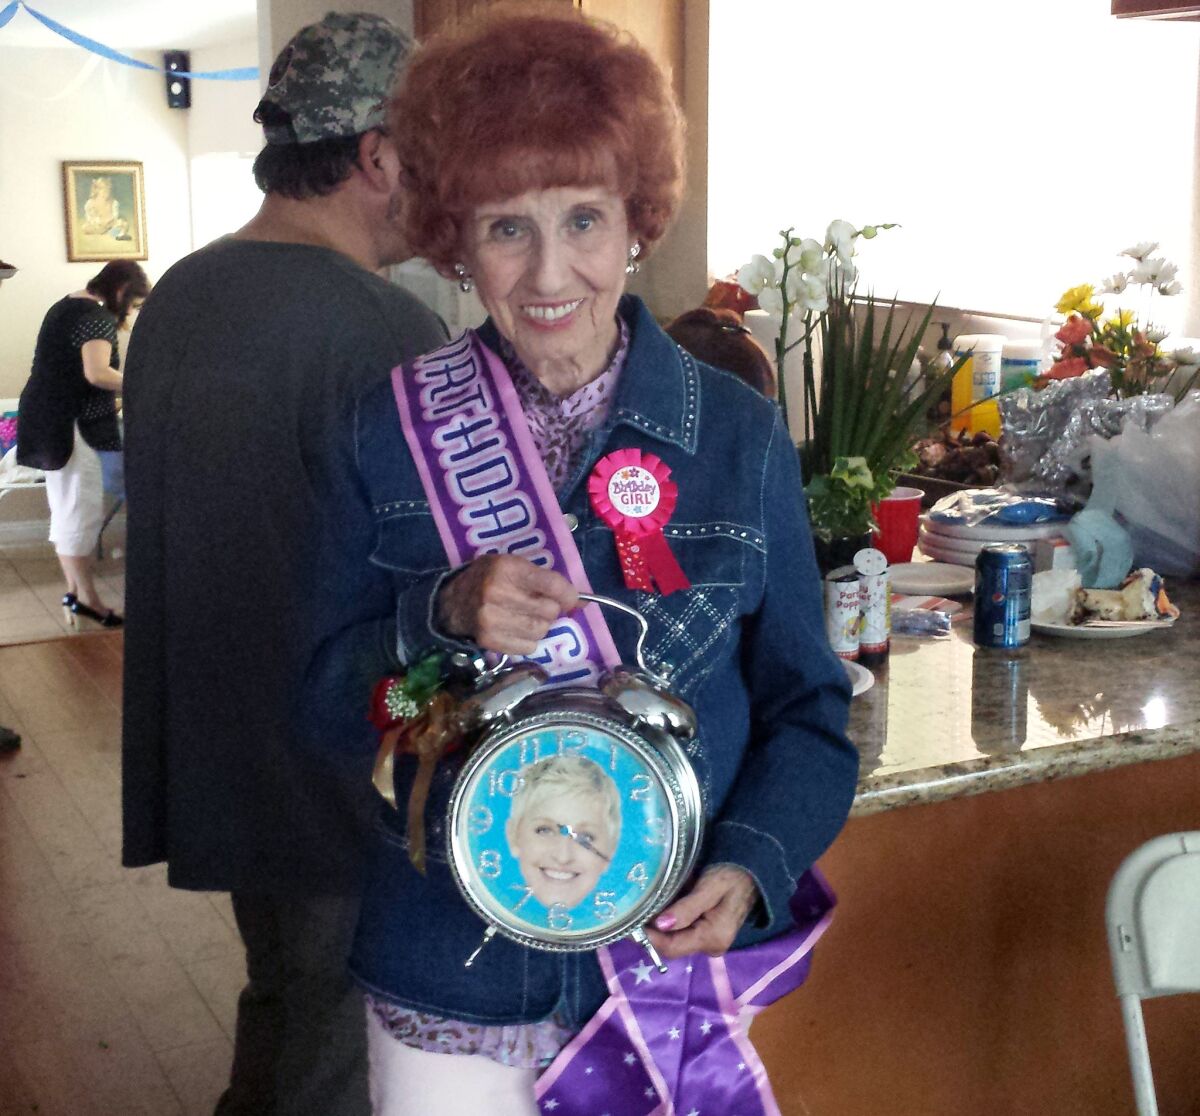 Elinor Otto, a "Rosie the Riveter" who still works for Boeing, at her surprise 94th birthday party with the clock given to her on the "Ellen" show.